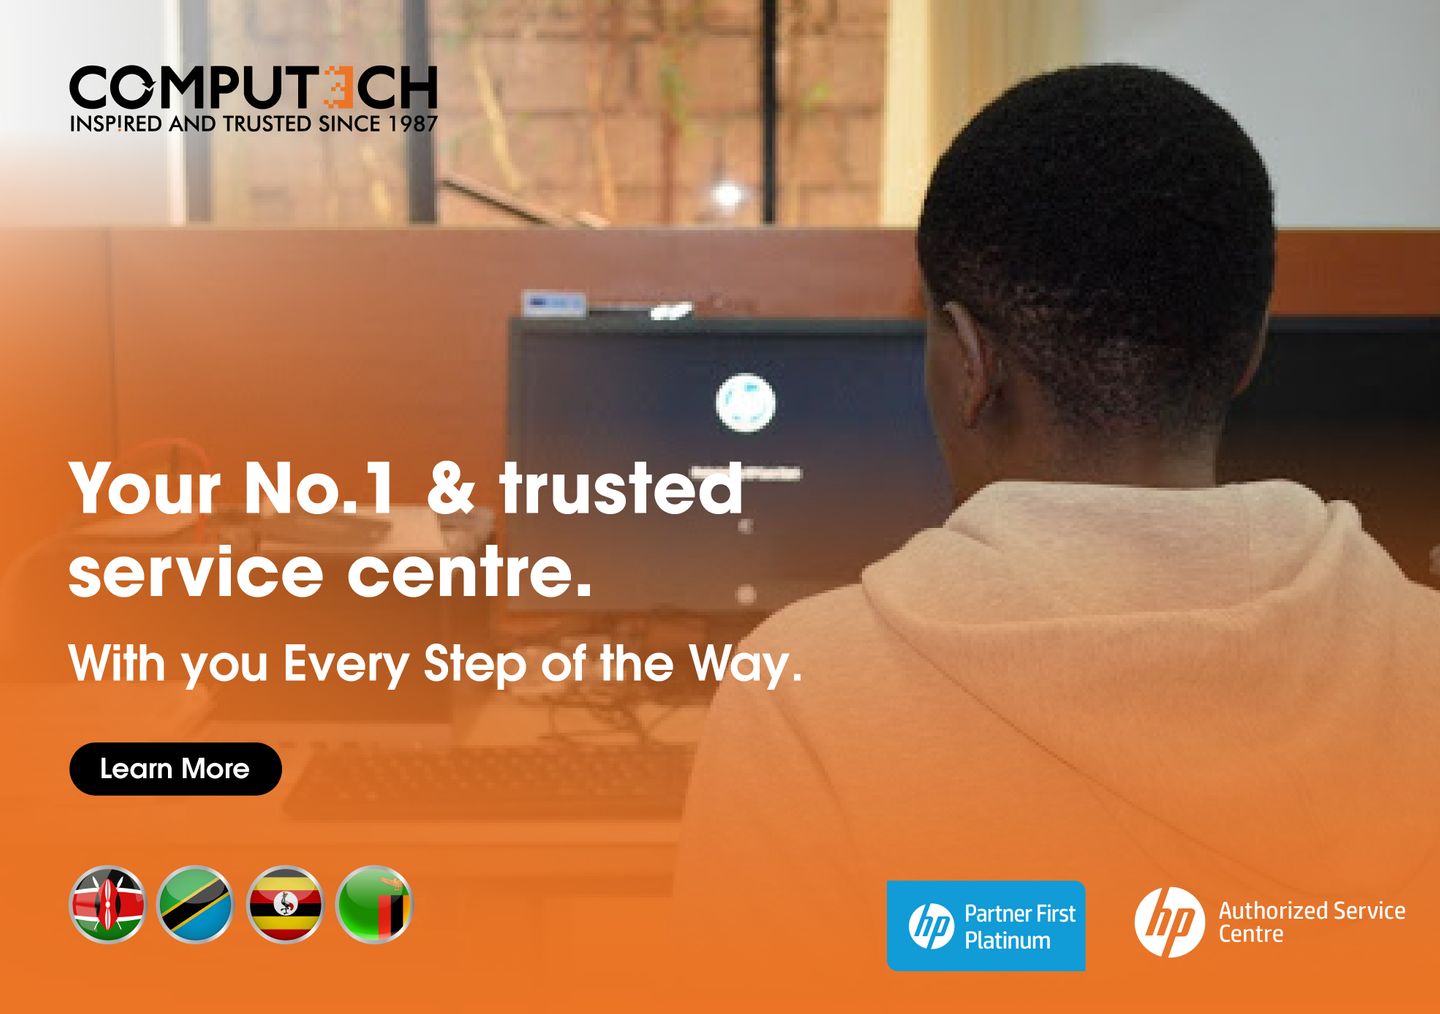 Figure 1: Your Best HP Authorized Service Centre in Kenya. Trusted HP Authorized Reseller and Platinum Partner